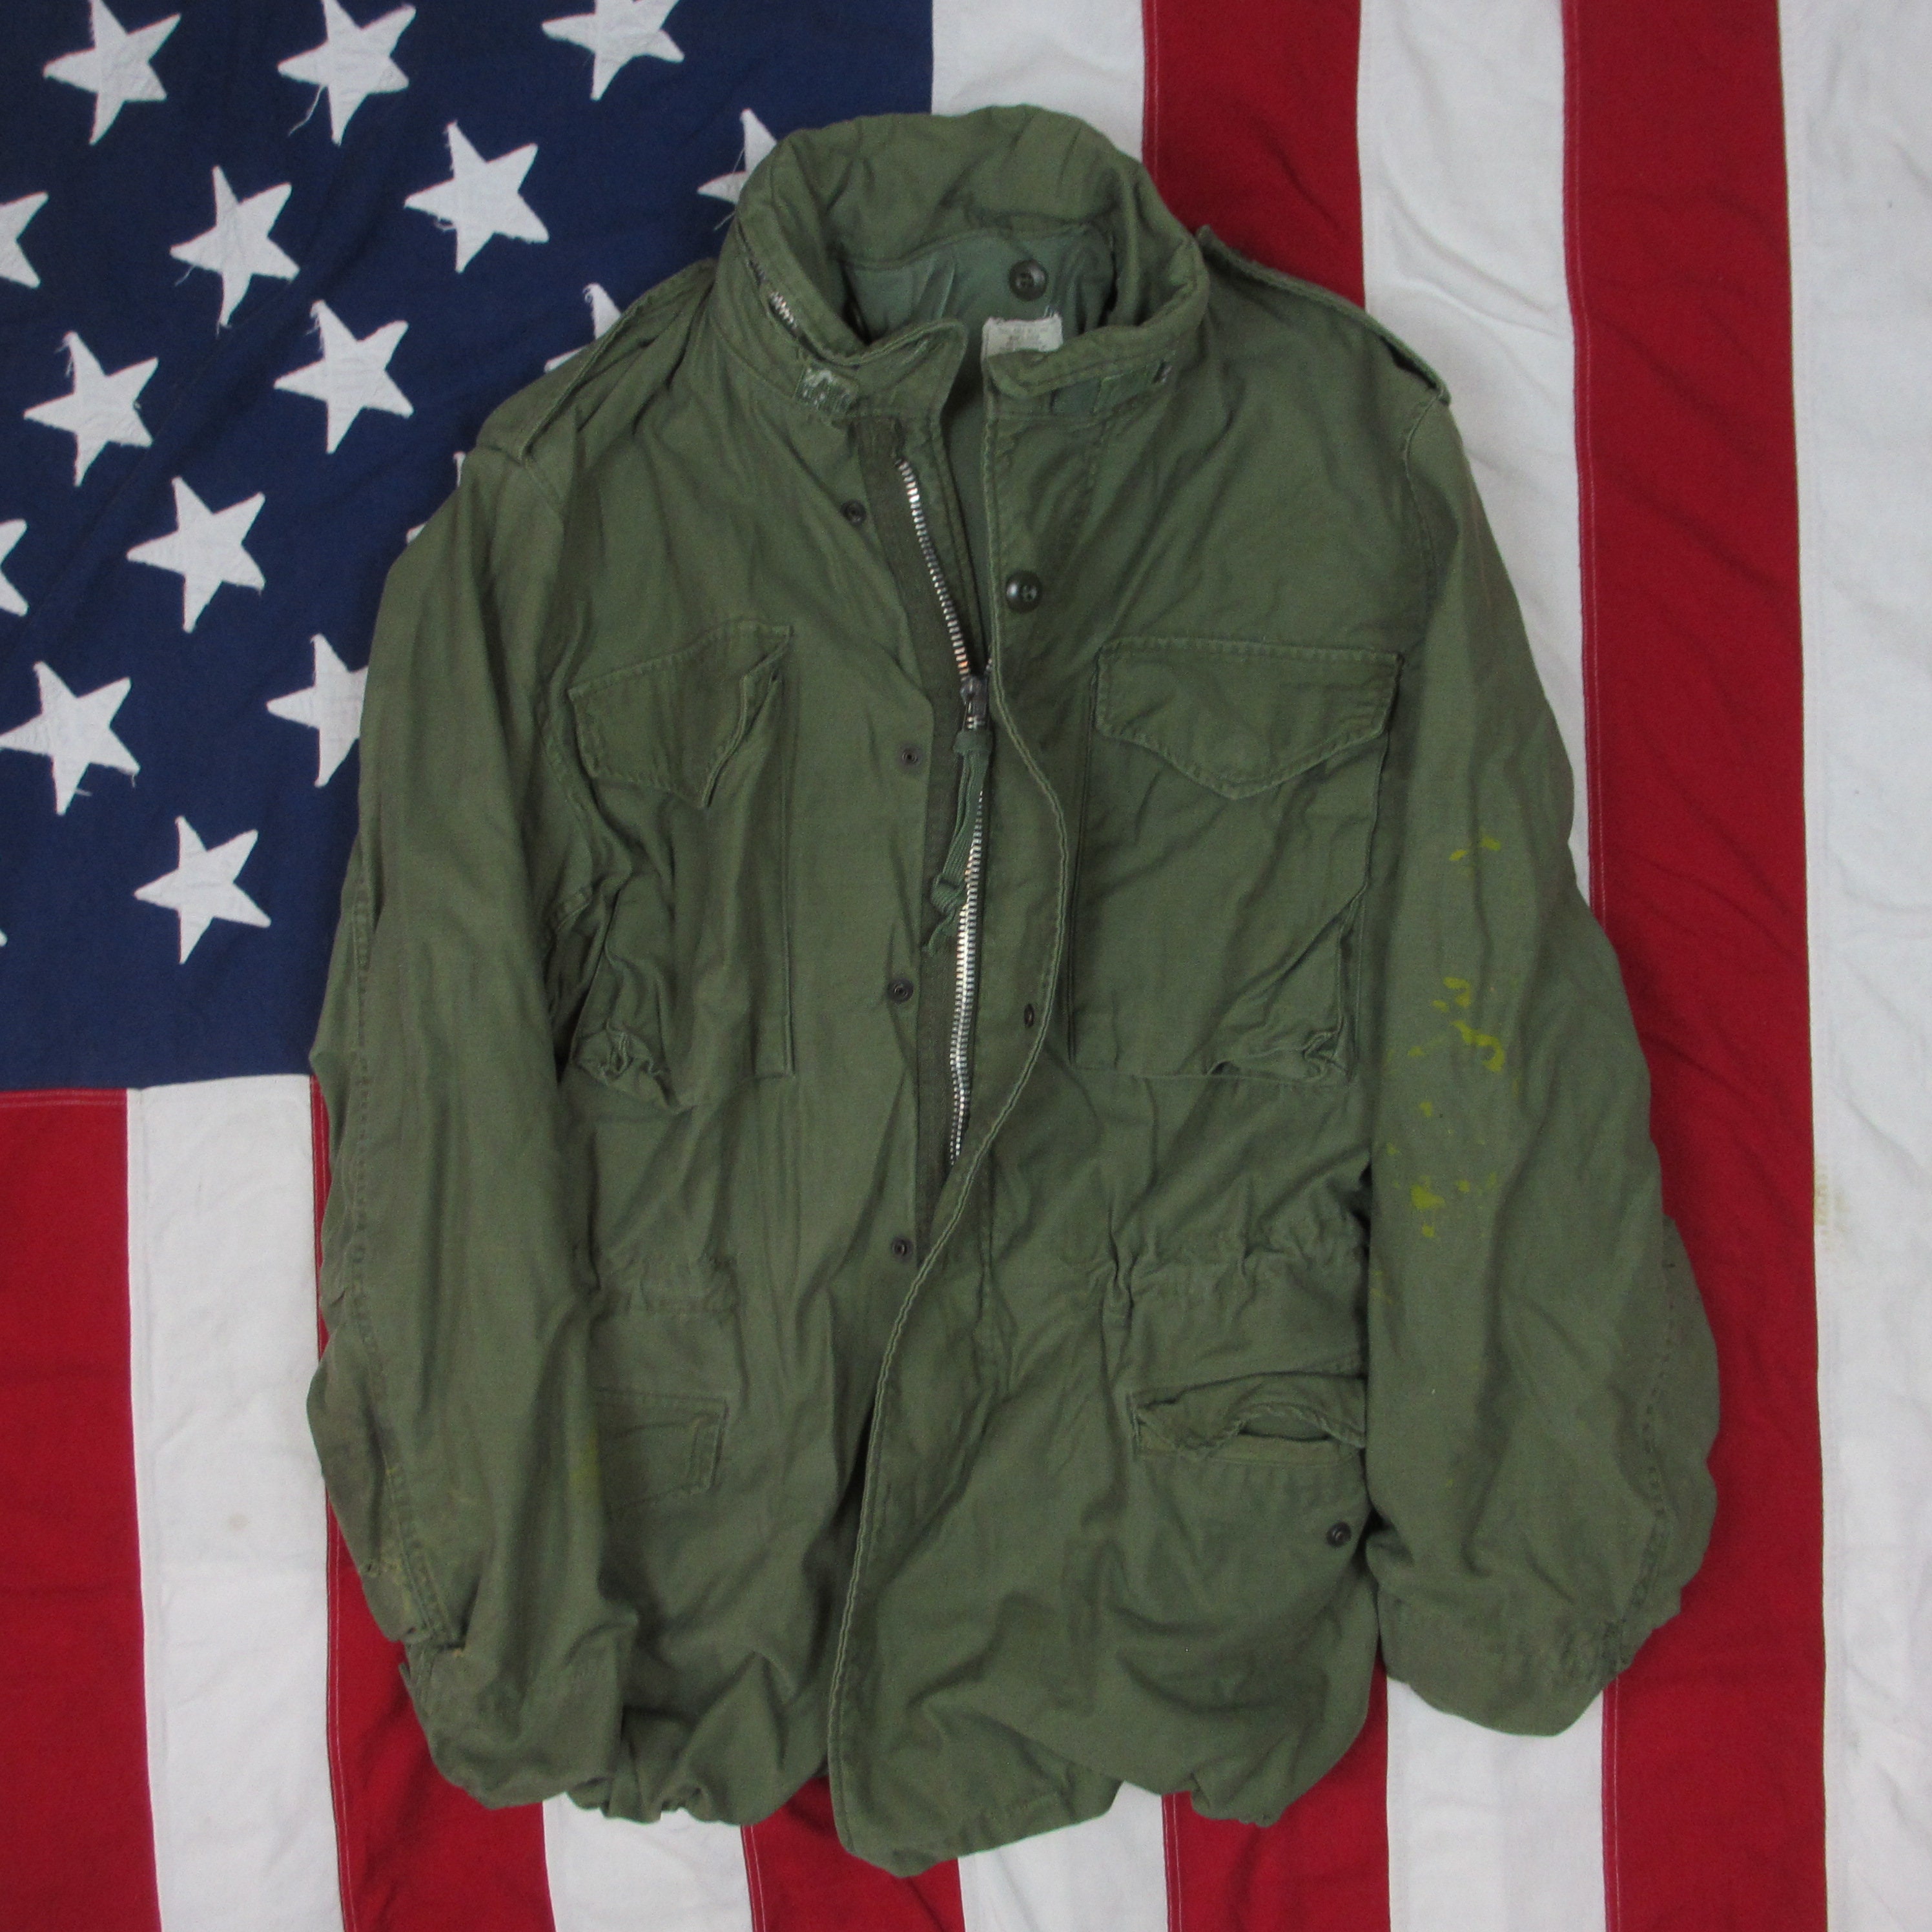 Vietnam Field Jacket for sale | Only 4 left at -60%